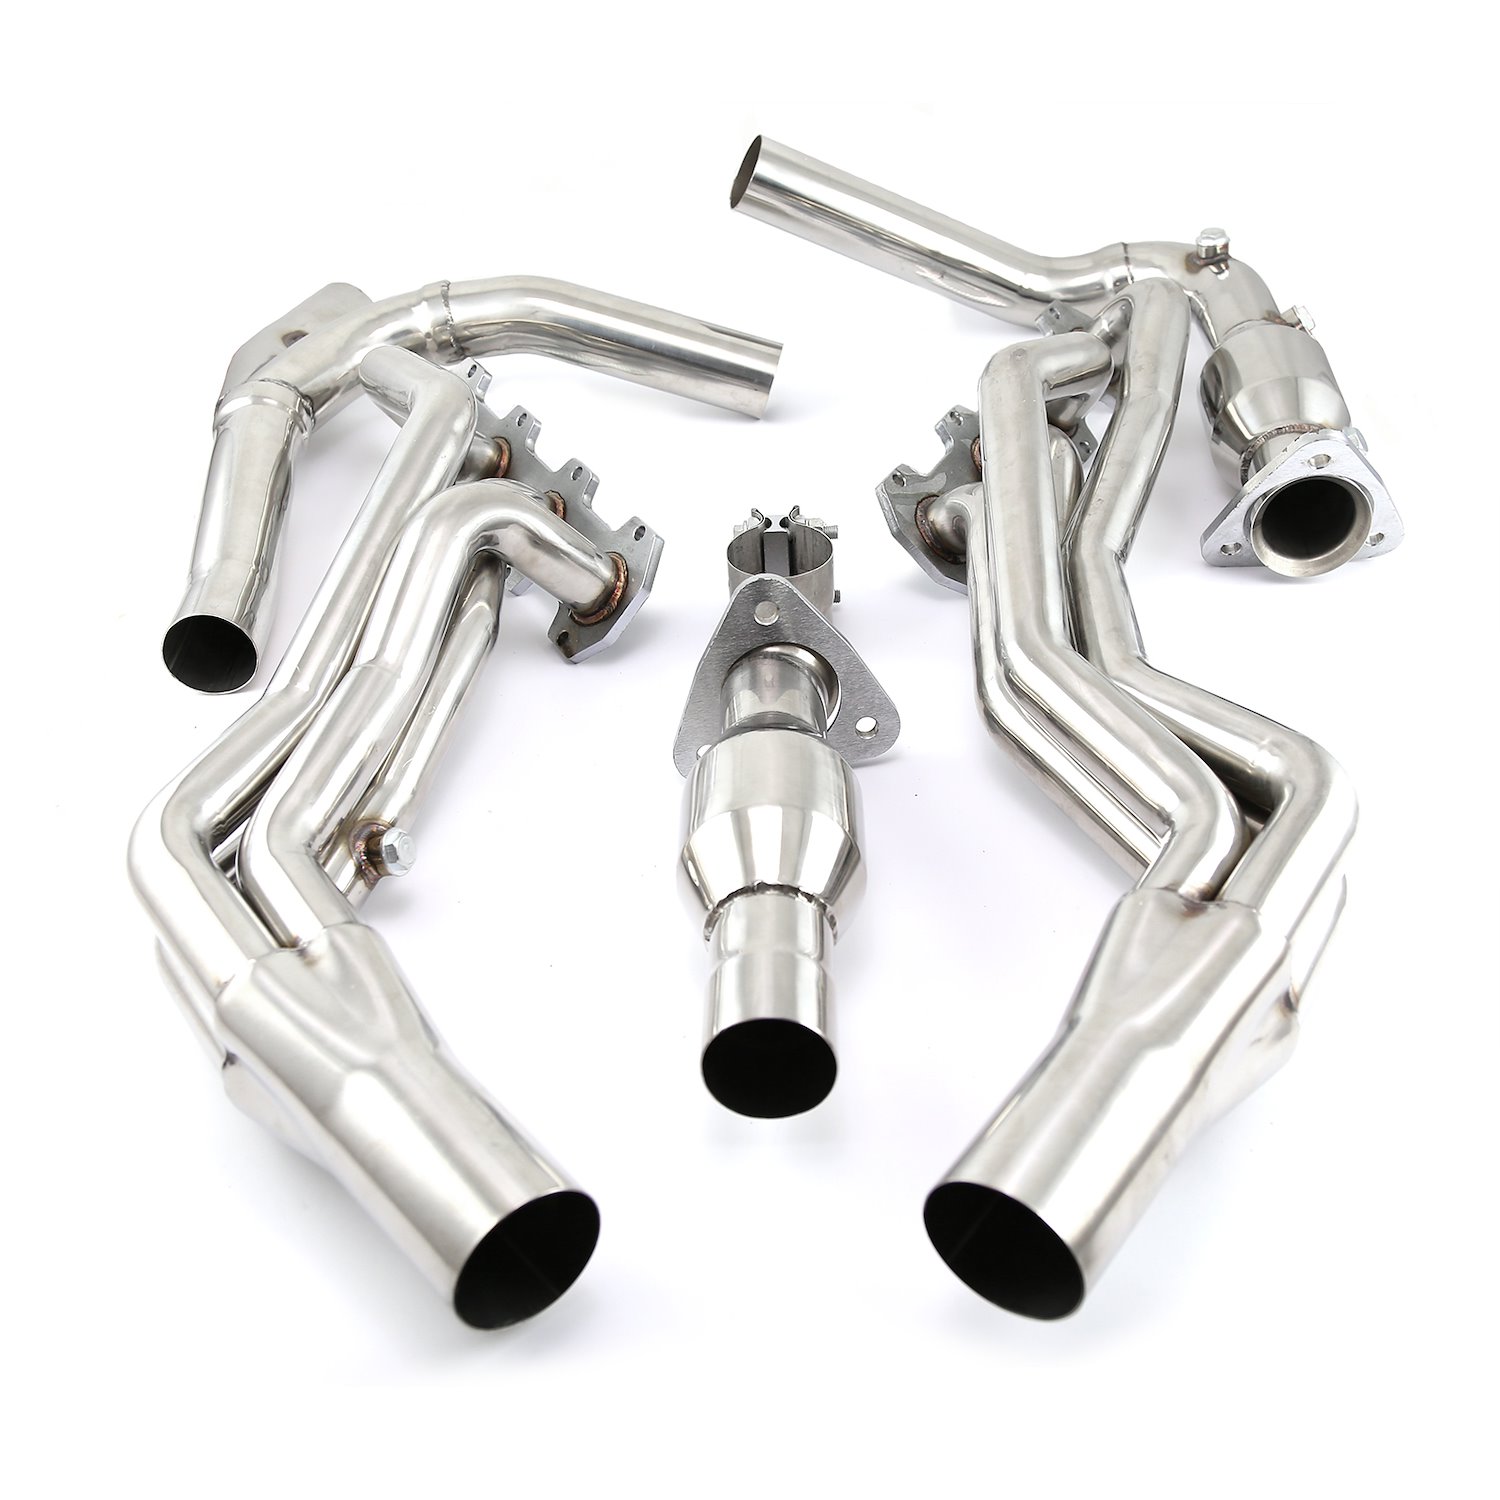 Ford F150 2004-2010 Truck 4X4 5.4L V8 Stainless Steel Exhaust Headers